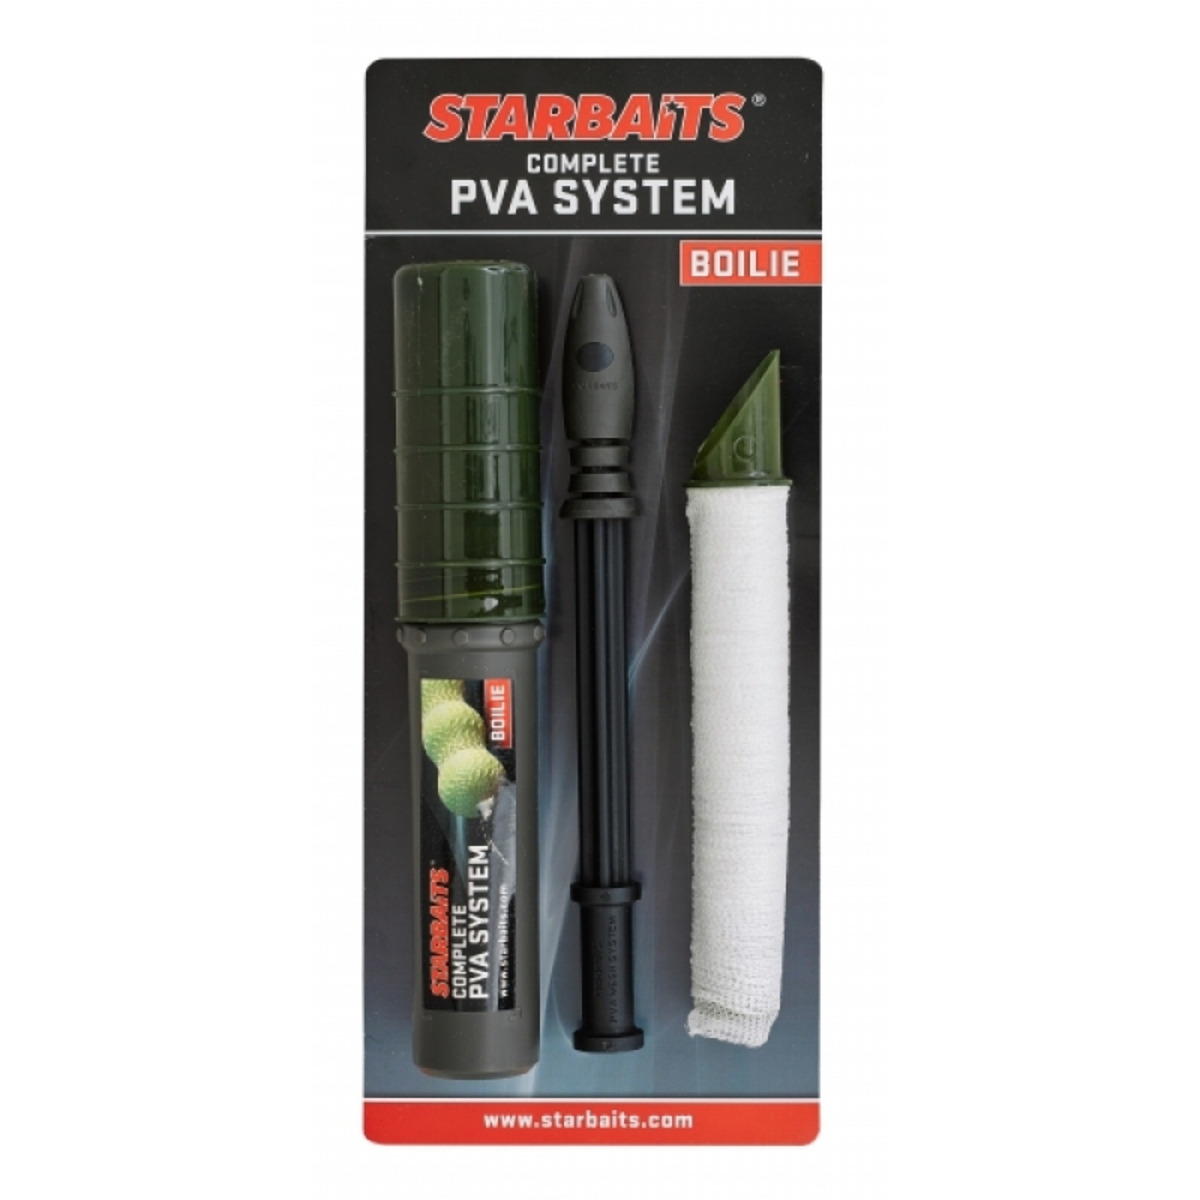  Pva Boilie System - Complete